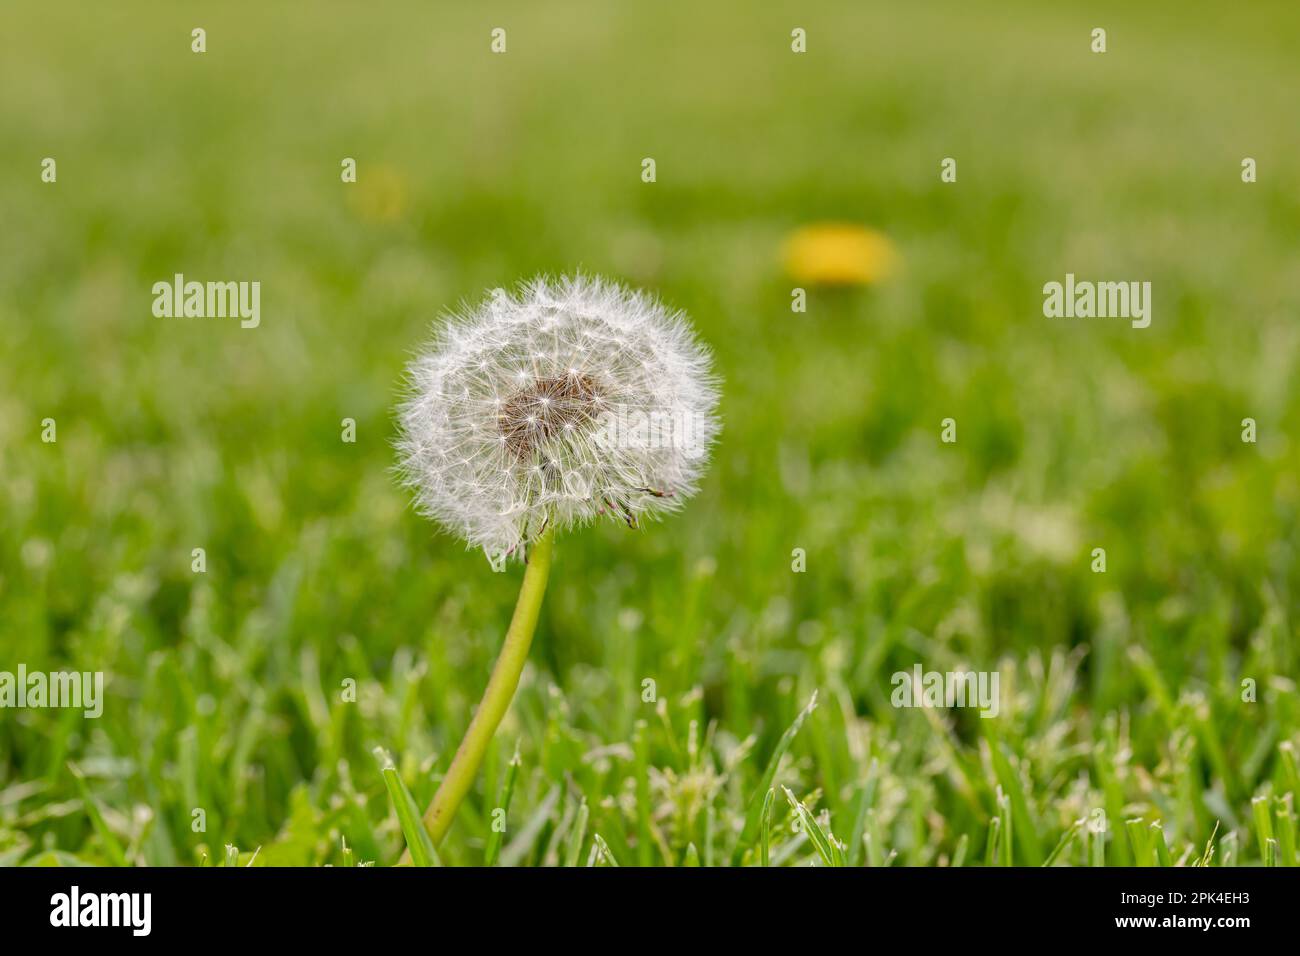 Dandelion weeds going to seed in lawn. Home lawncare, yard maintenance and weed control concept. Stock Photo